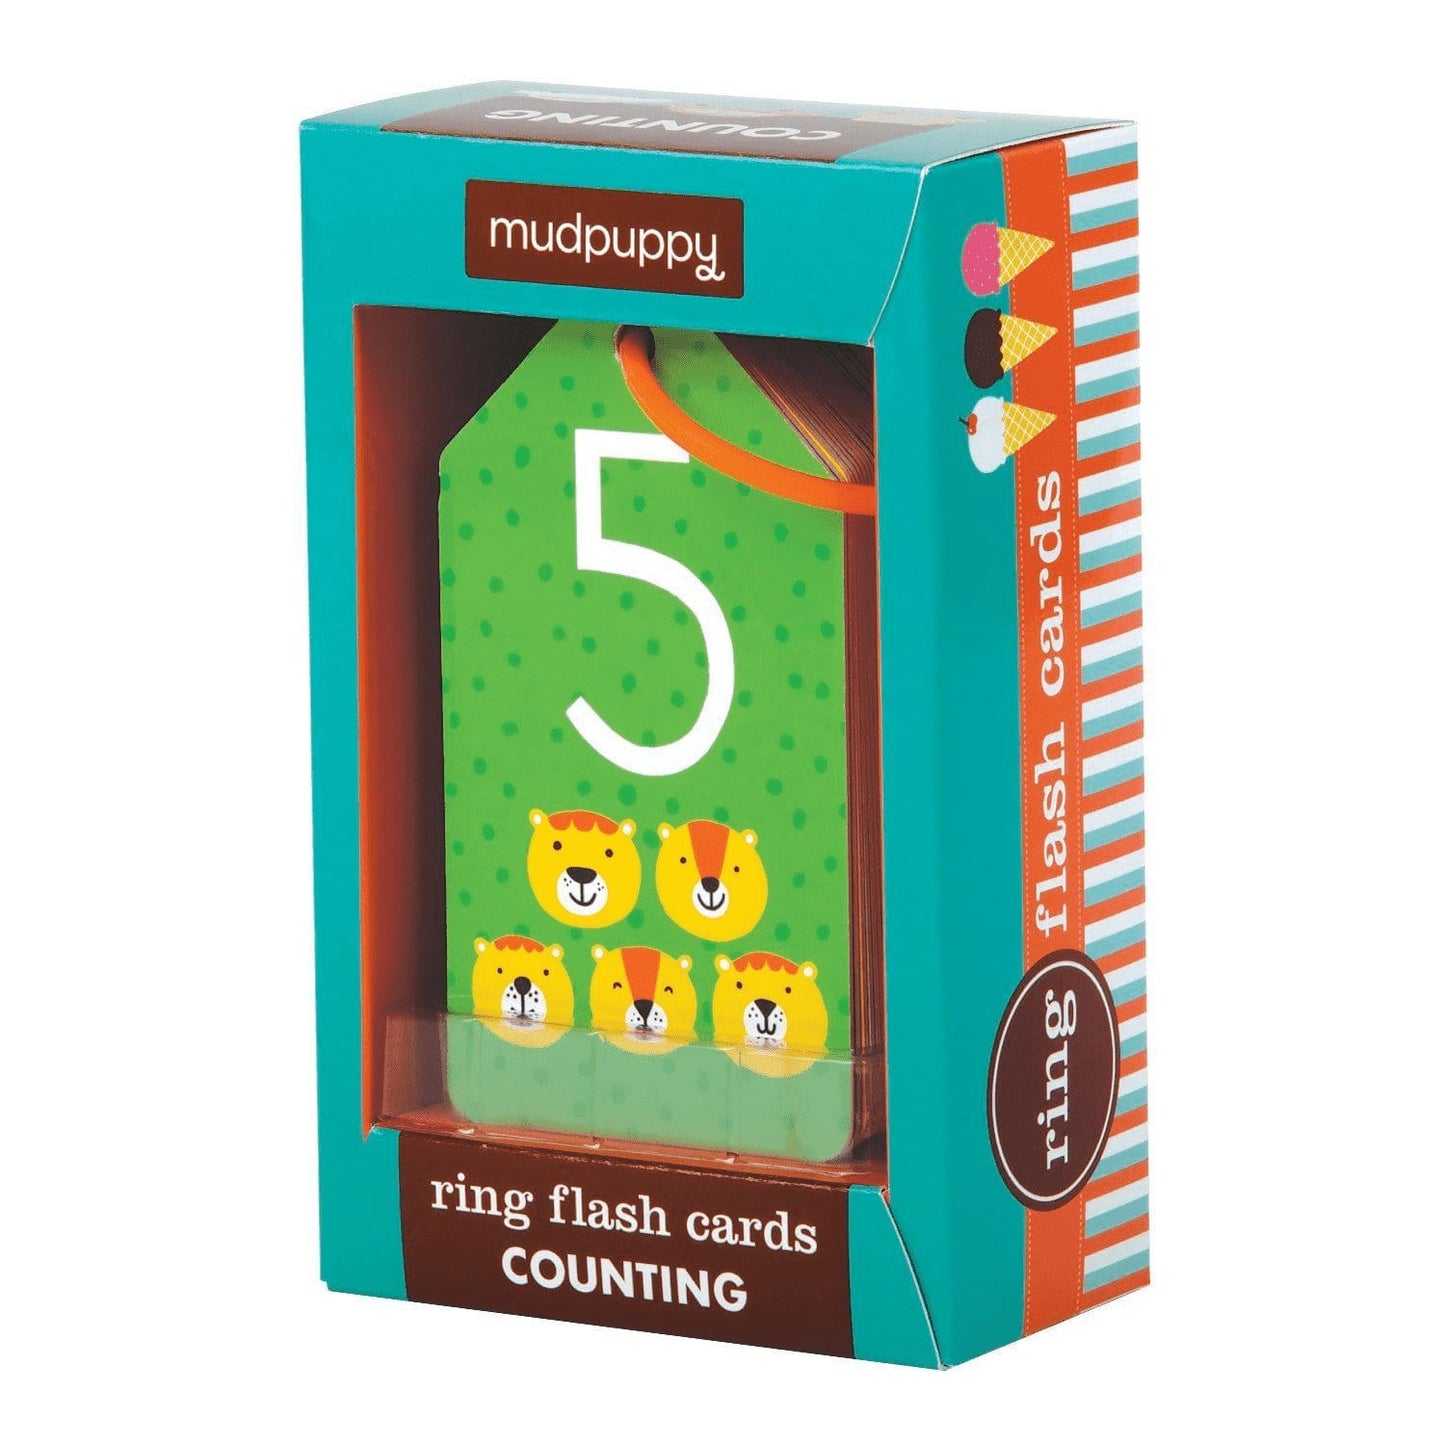 Flashcards Books Mudpuppy Counting 